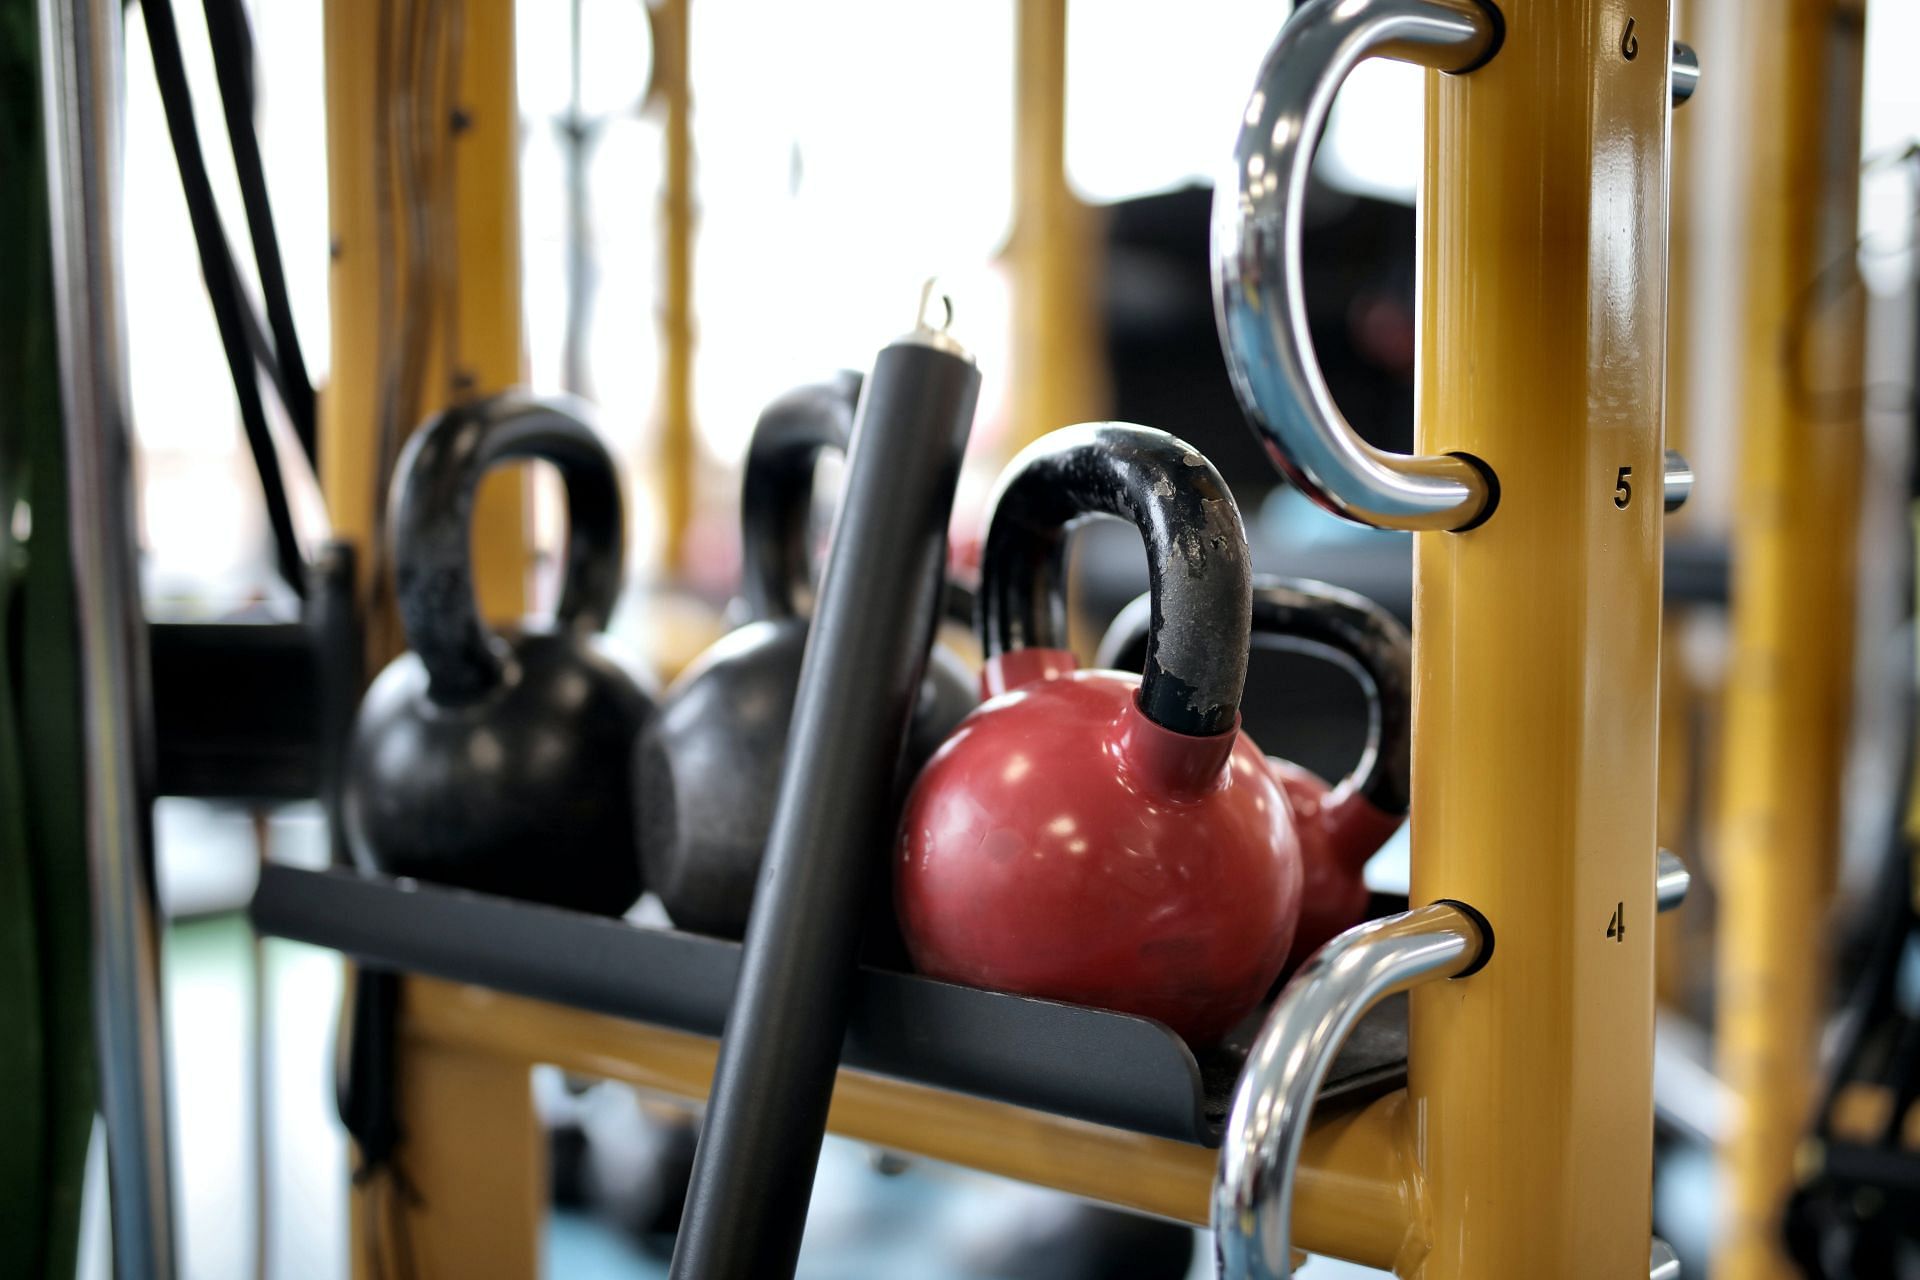 Kettlebells are great for compound exercises. (Image via Pexels / Andrea)